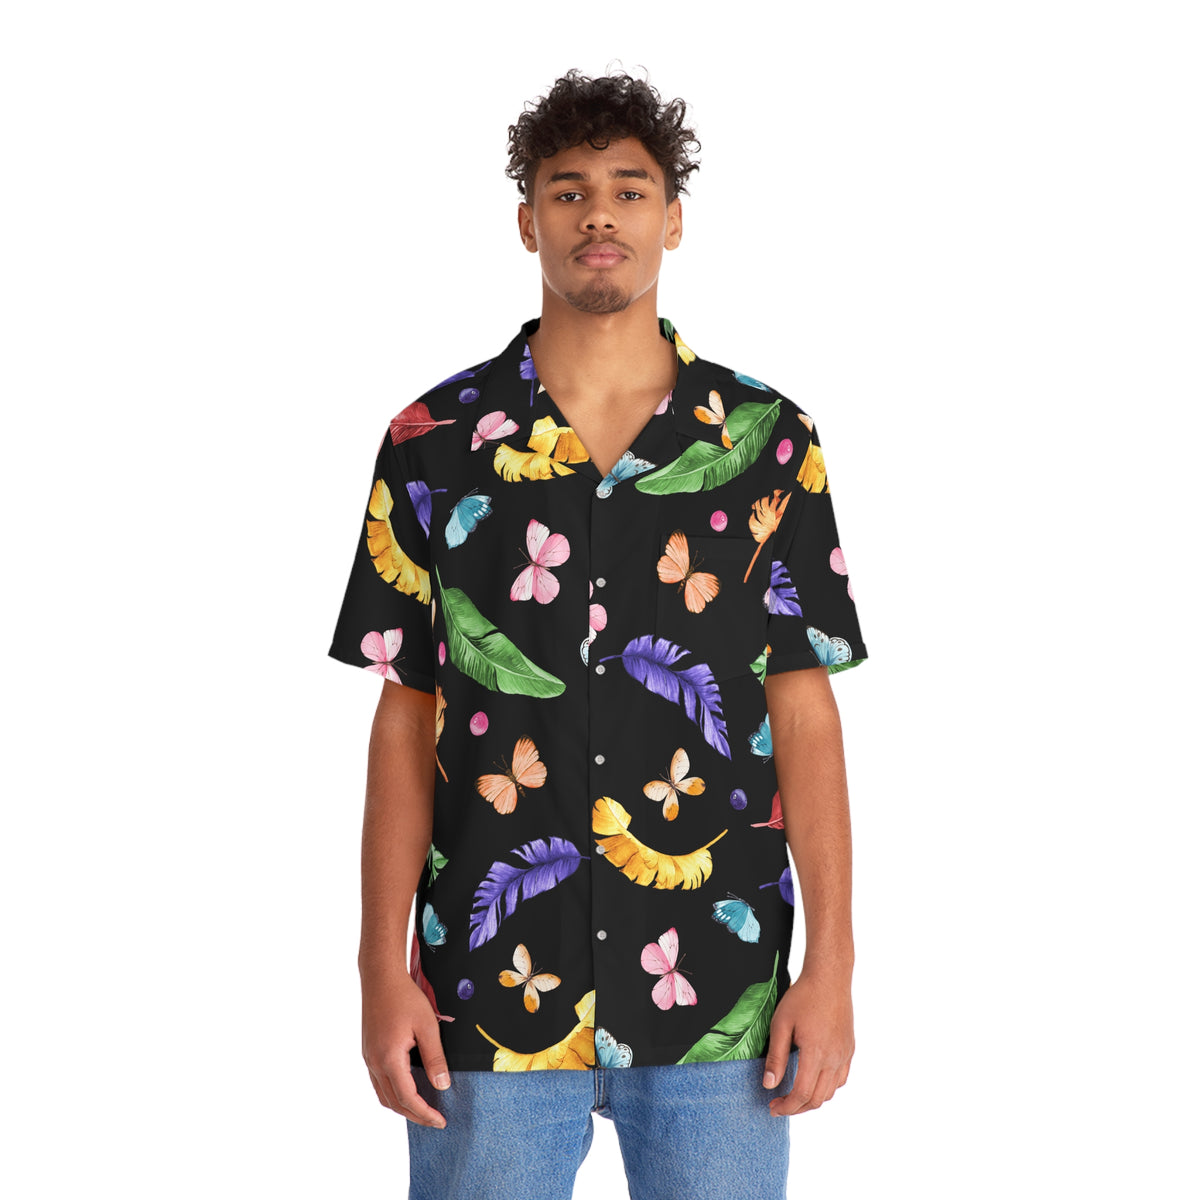 The Tropical Butterfly Button Up - Black